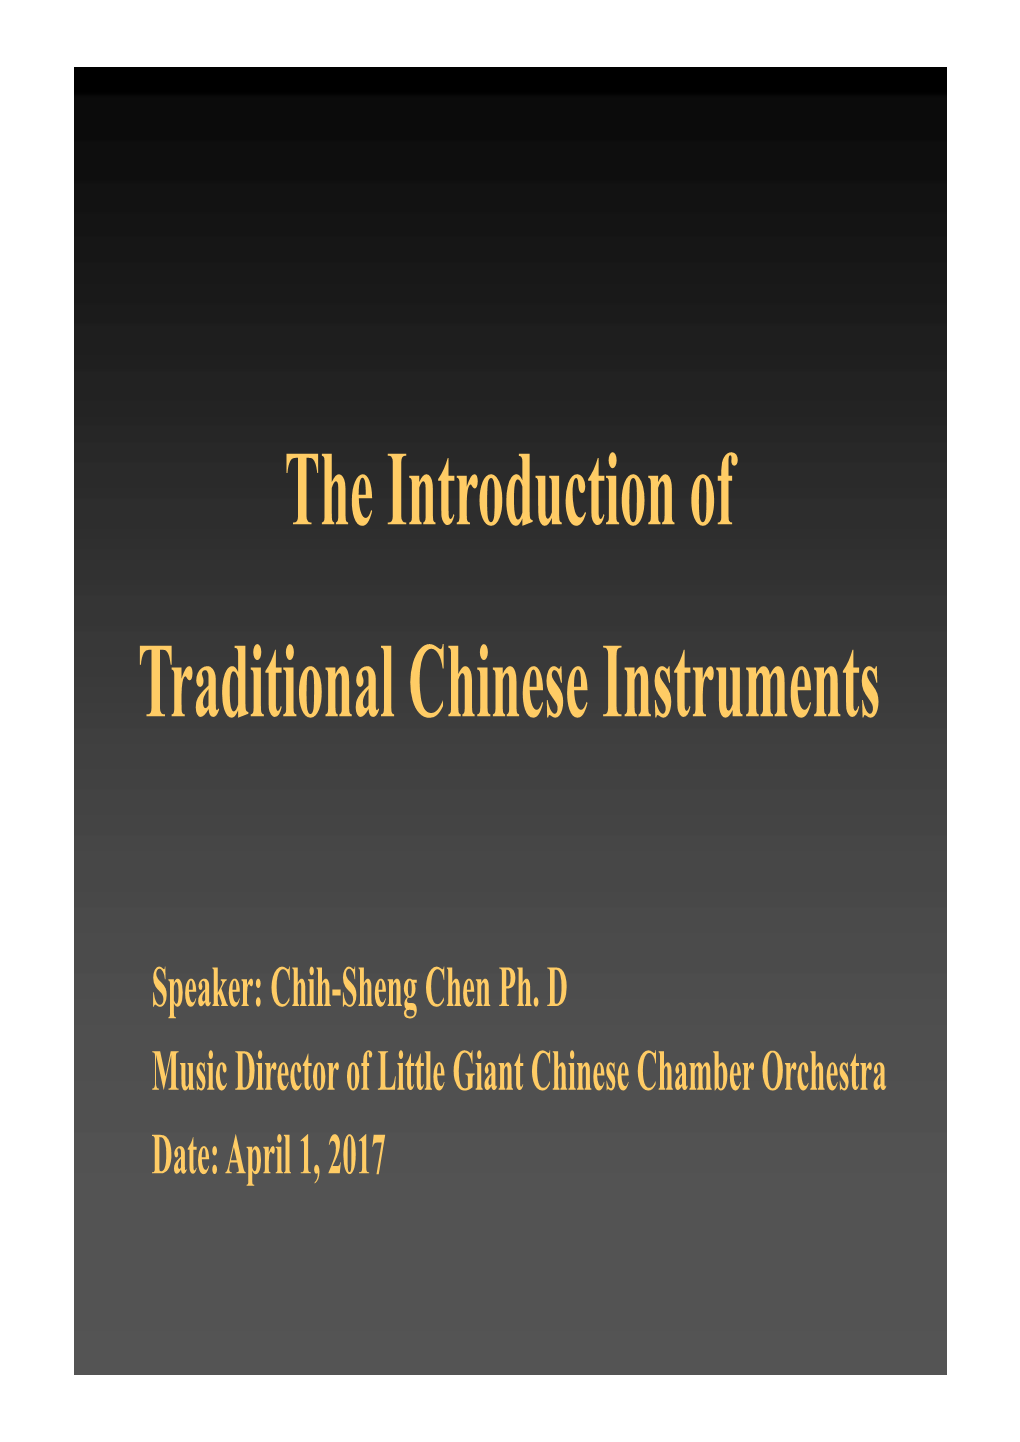 The Introduction of Traditional Chinese Instruments